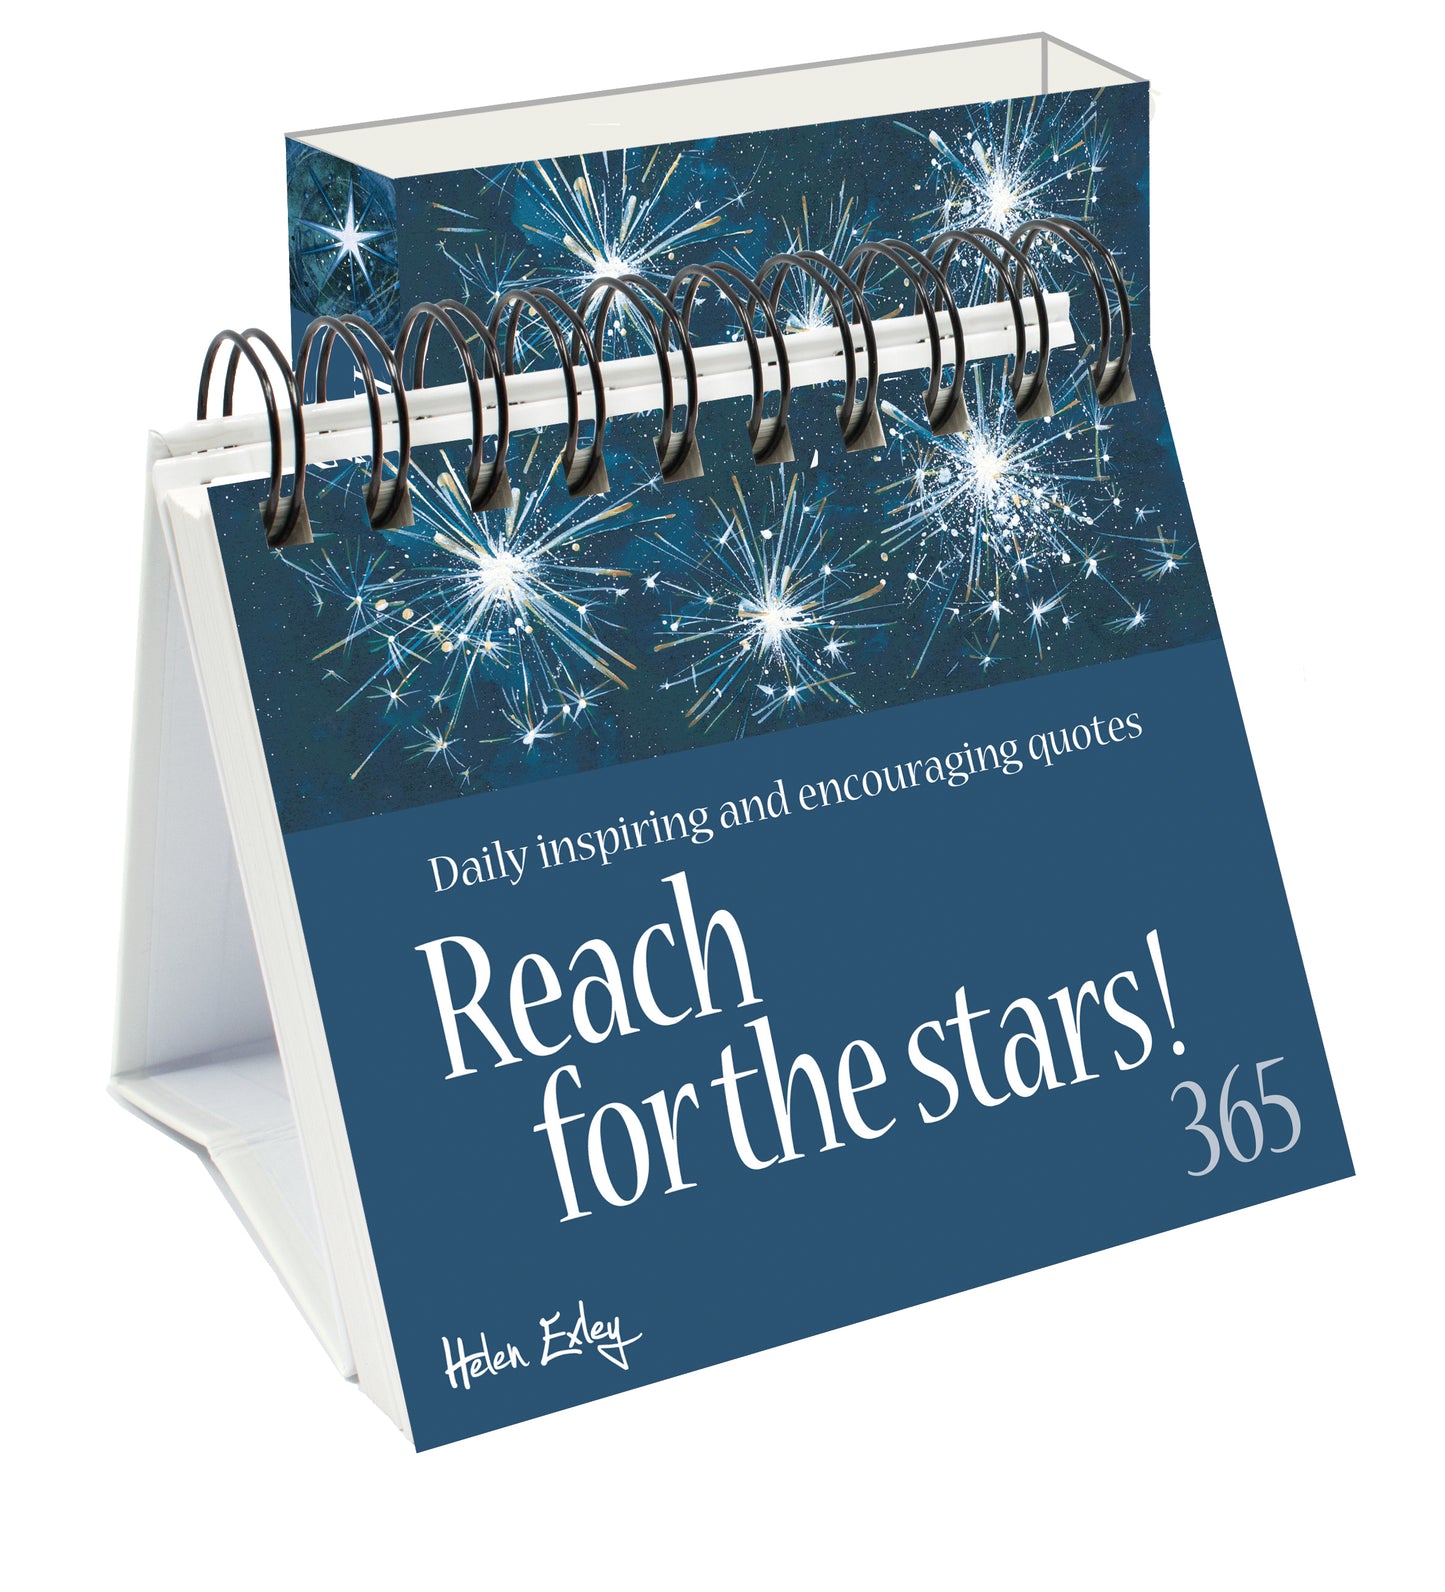 365 Reach for the Stars - Daily inspiring and encouraging quotes